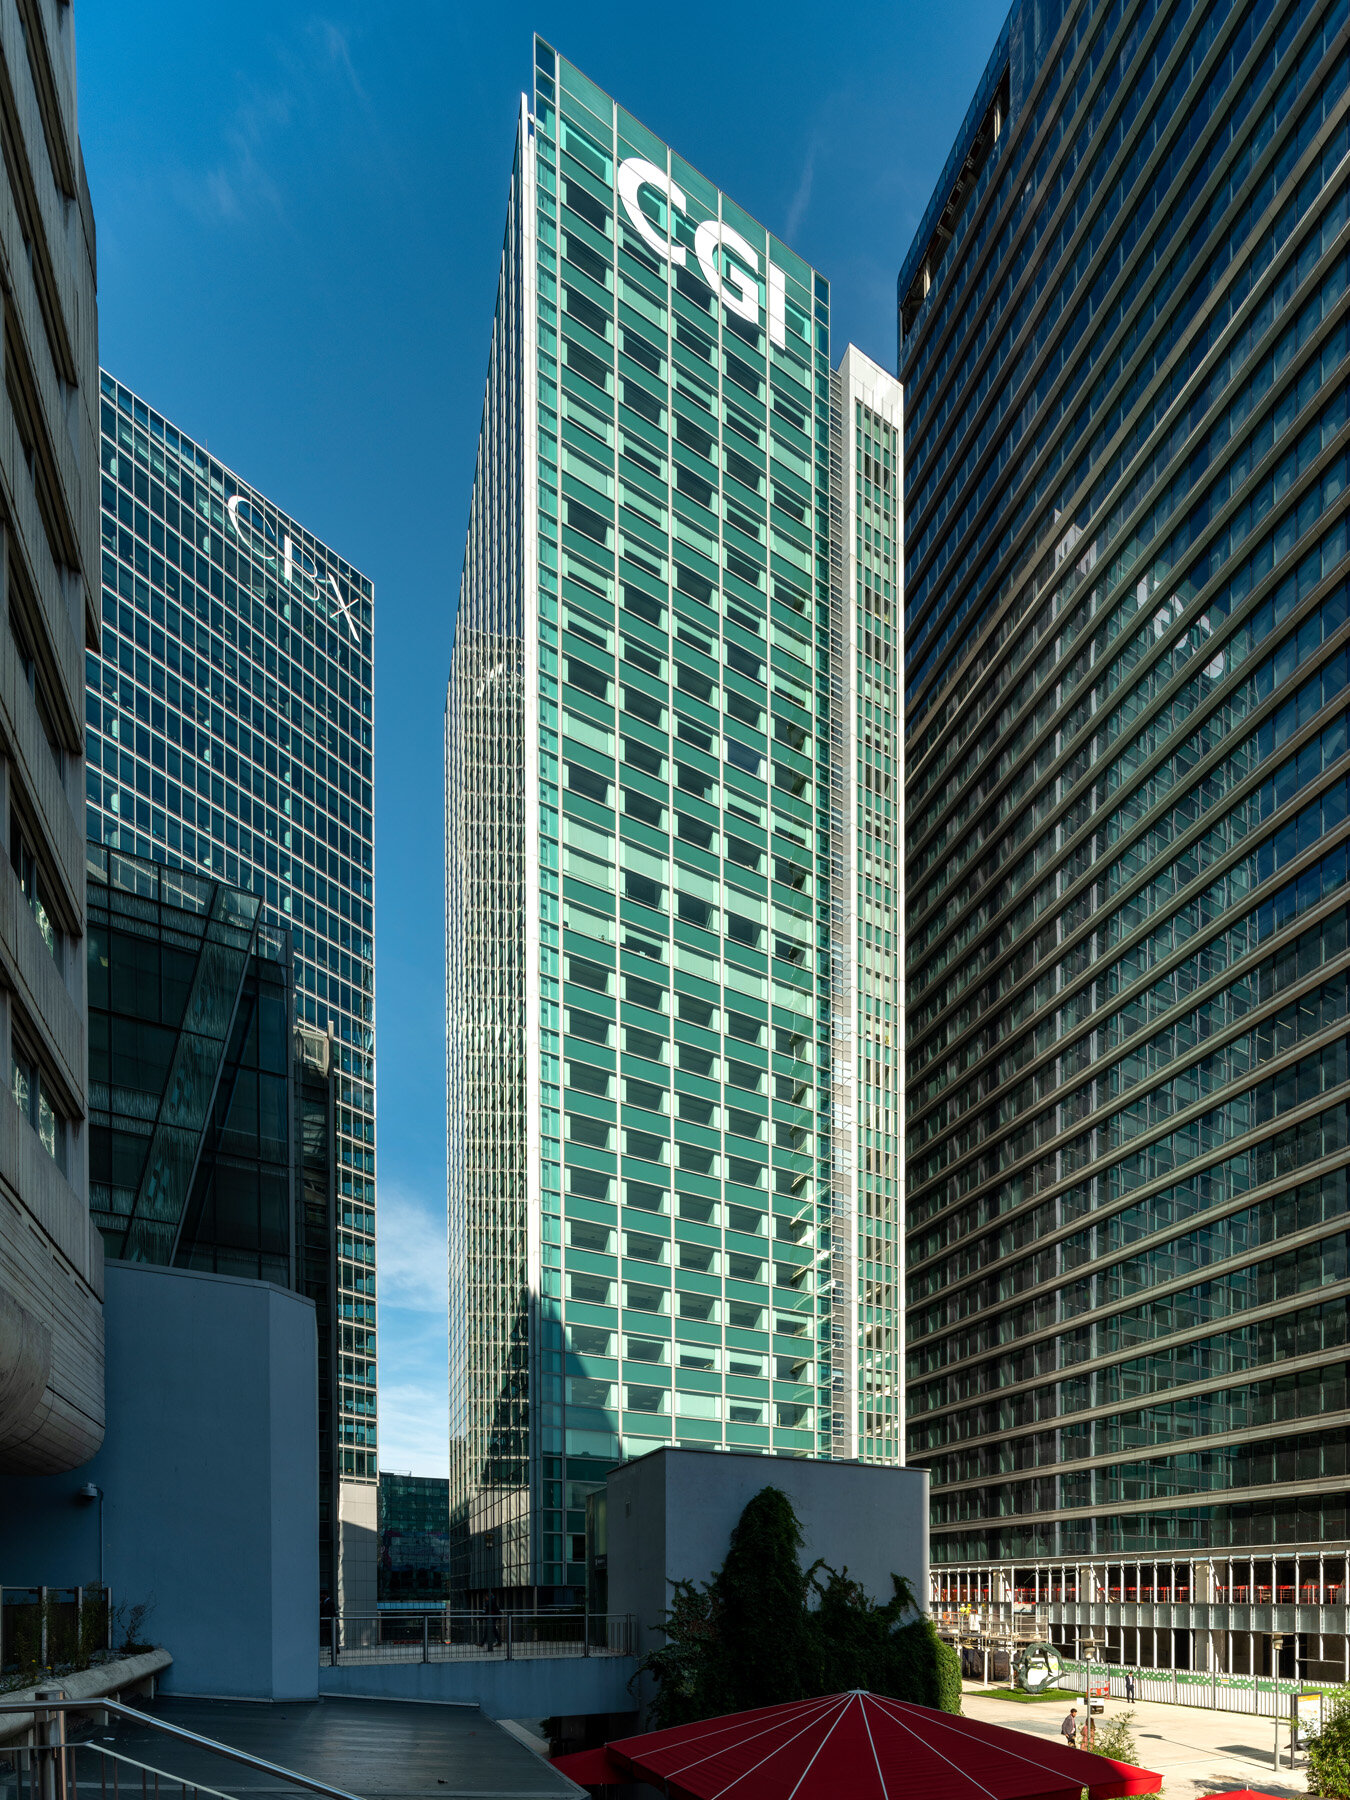  CGI Tower - 17 Place des Reflets,Courbevoie, France. Photo by Joas Souza  